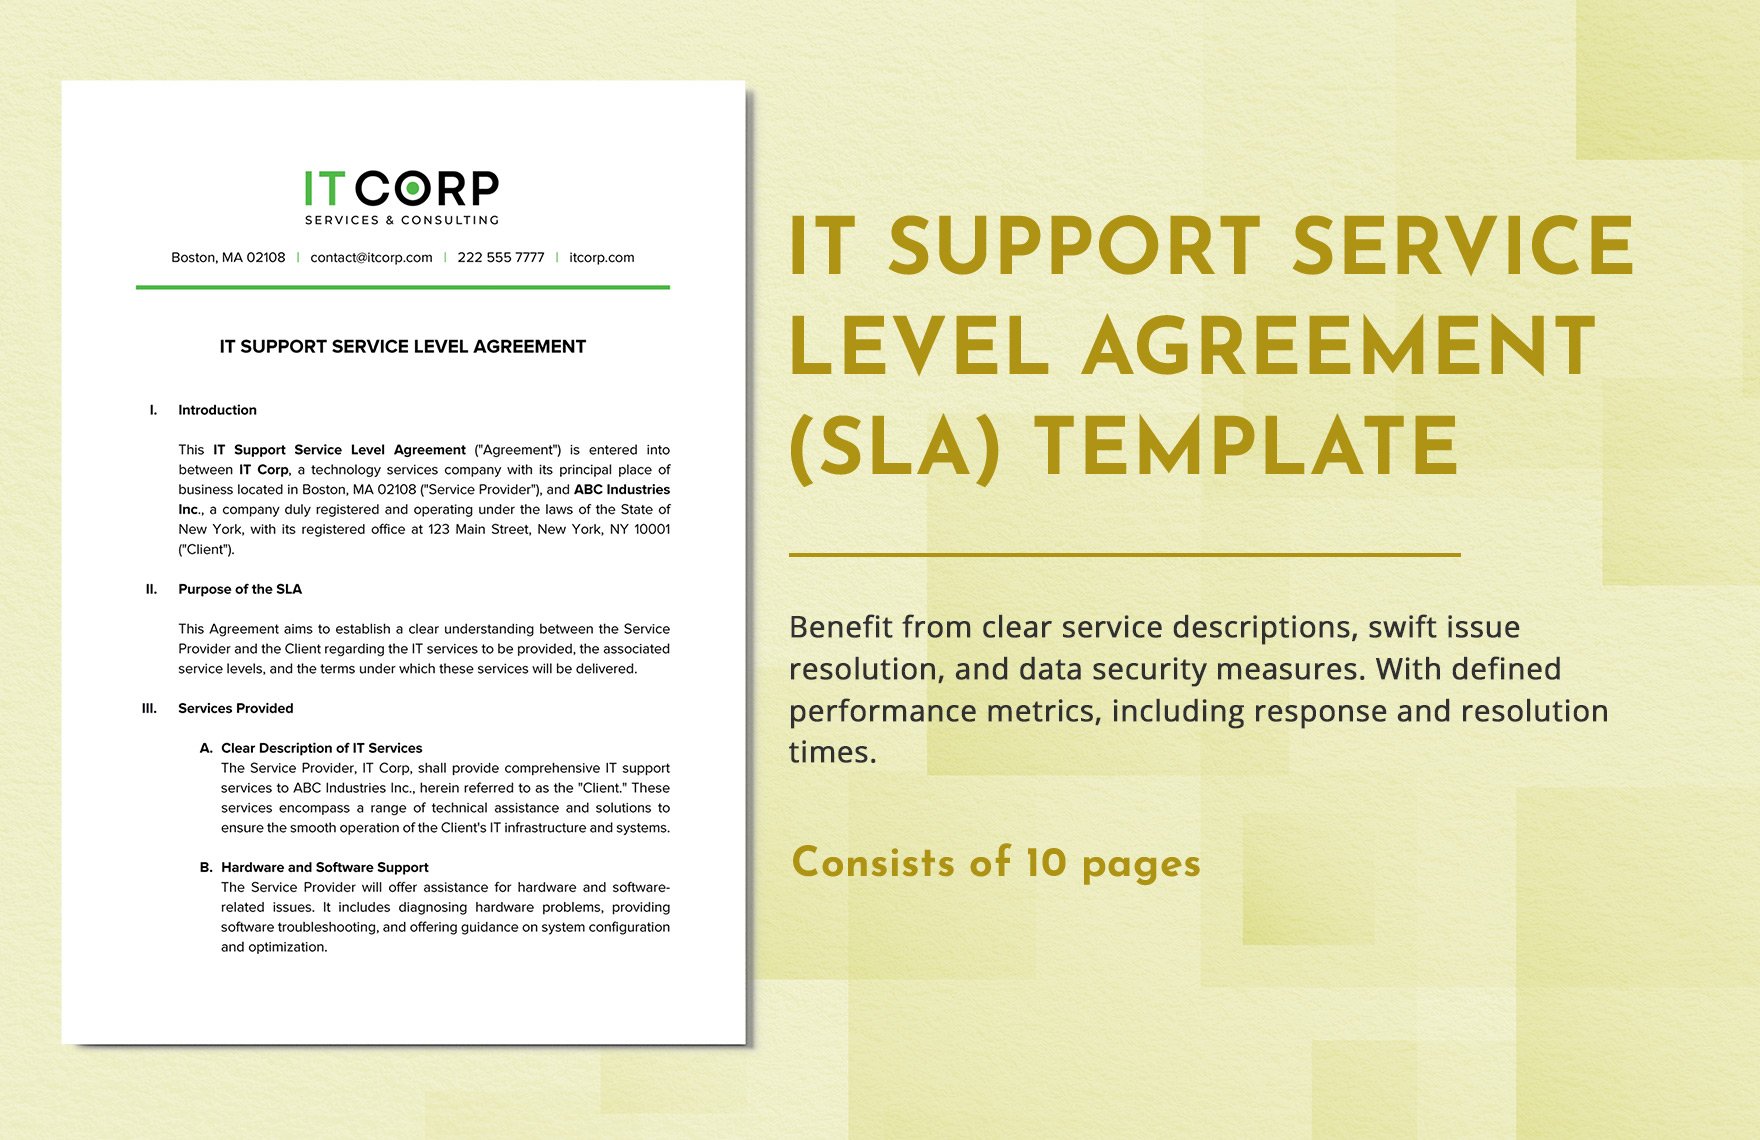 IT Support Service Level Agreement (SLA) Template